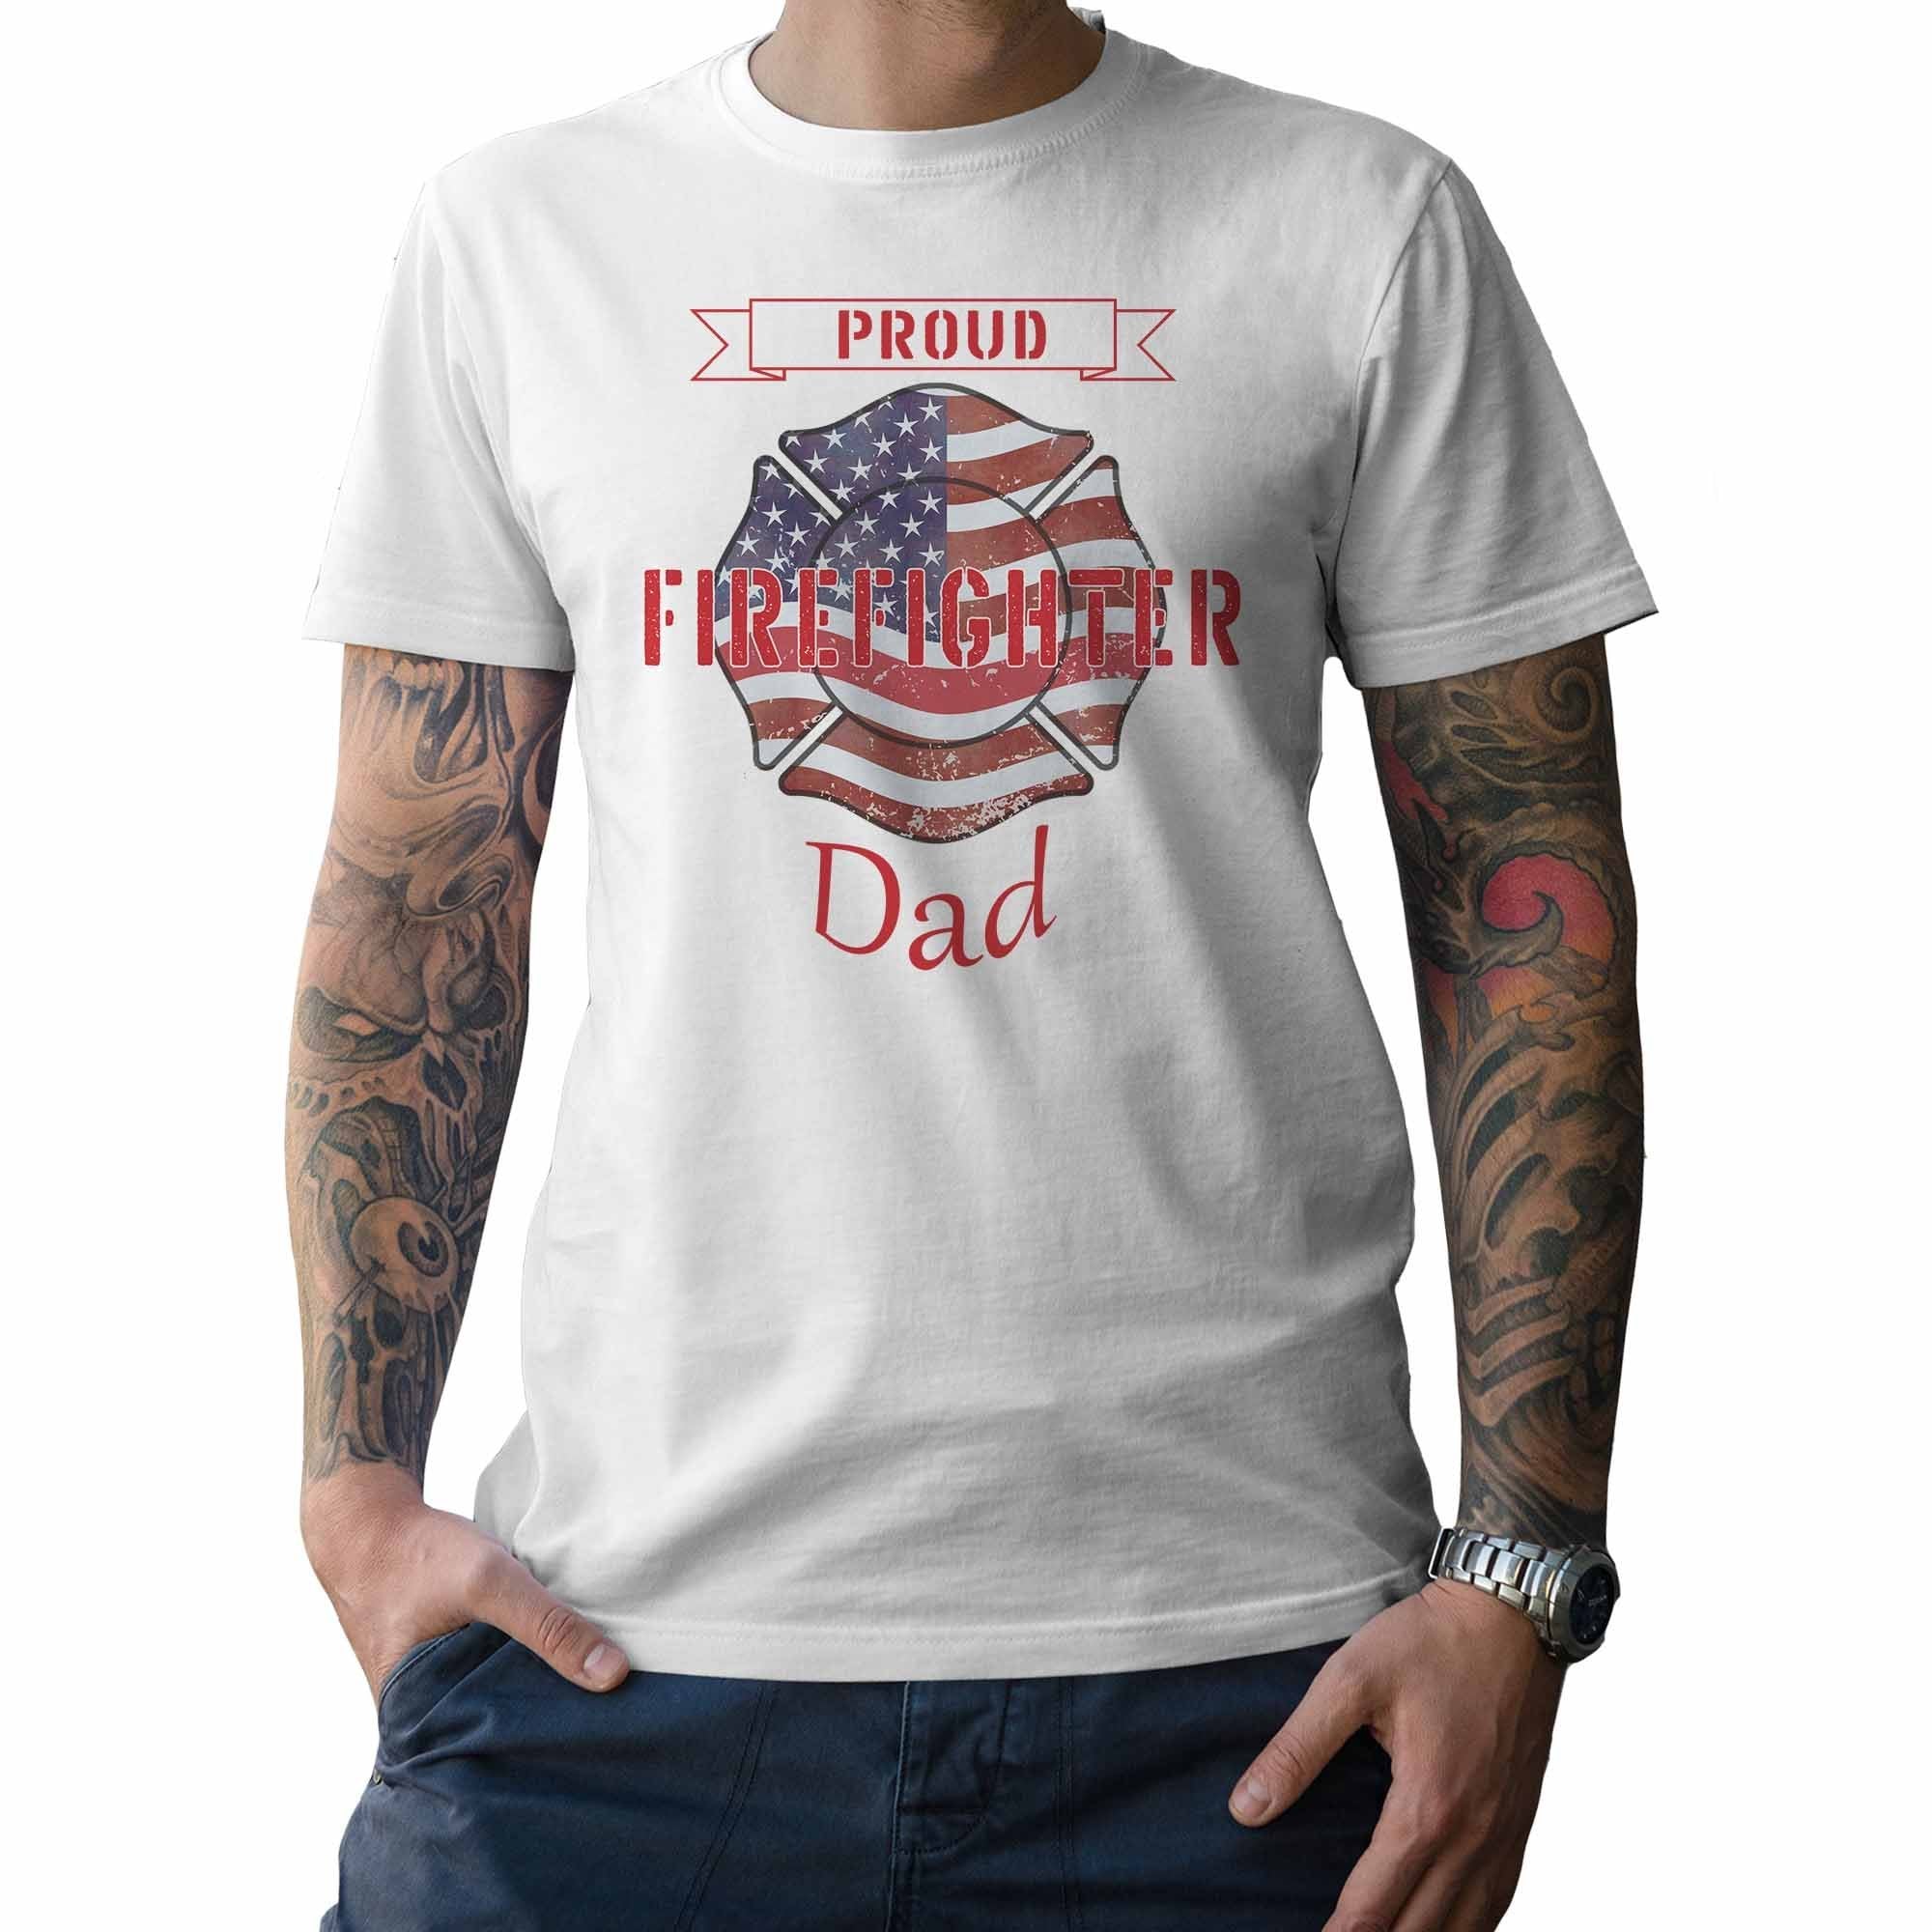 Proud Firefighter Dad - My Custom Tee Party